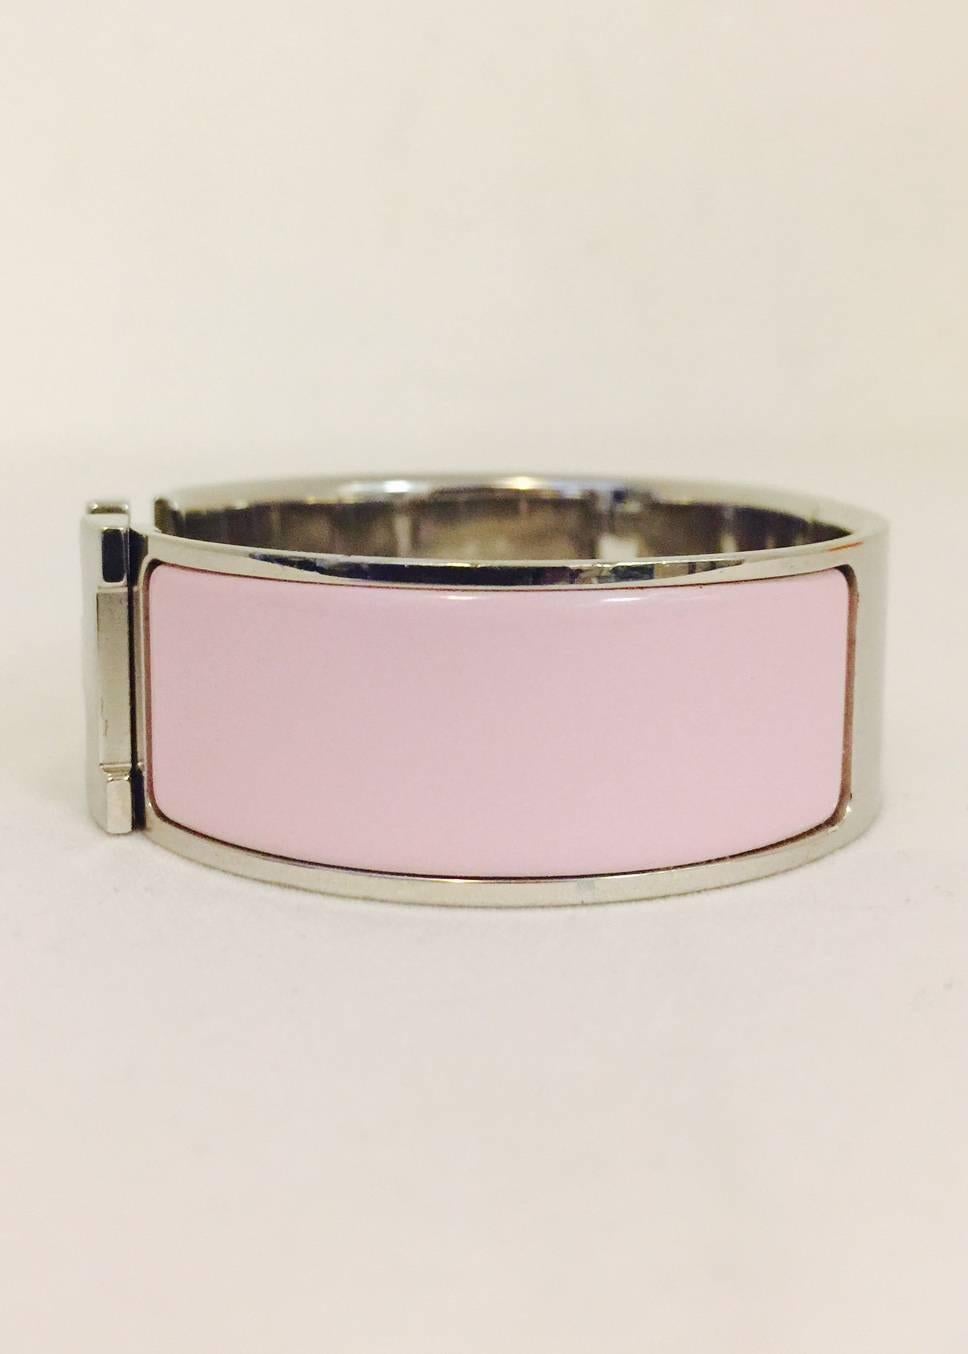 Hermes Palladium Pink Enamel Clic Clac H Bracelet  is one of the most highly recognizable pieces from this legendary luxury goods house! Features the world-renowned 